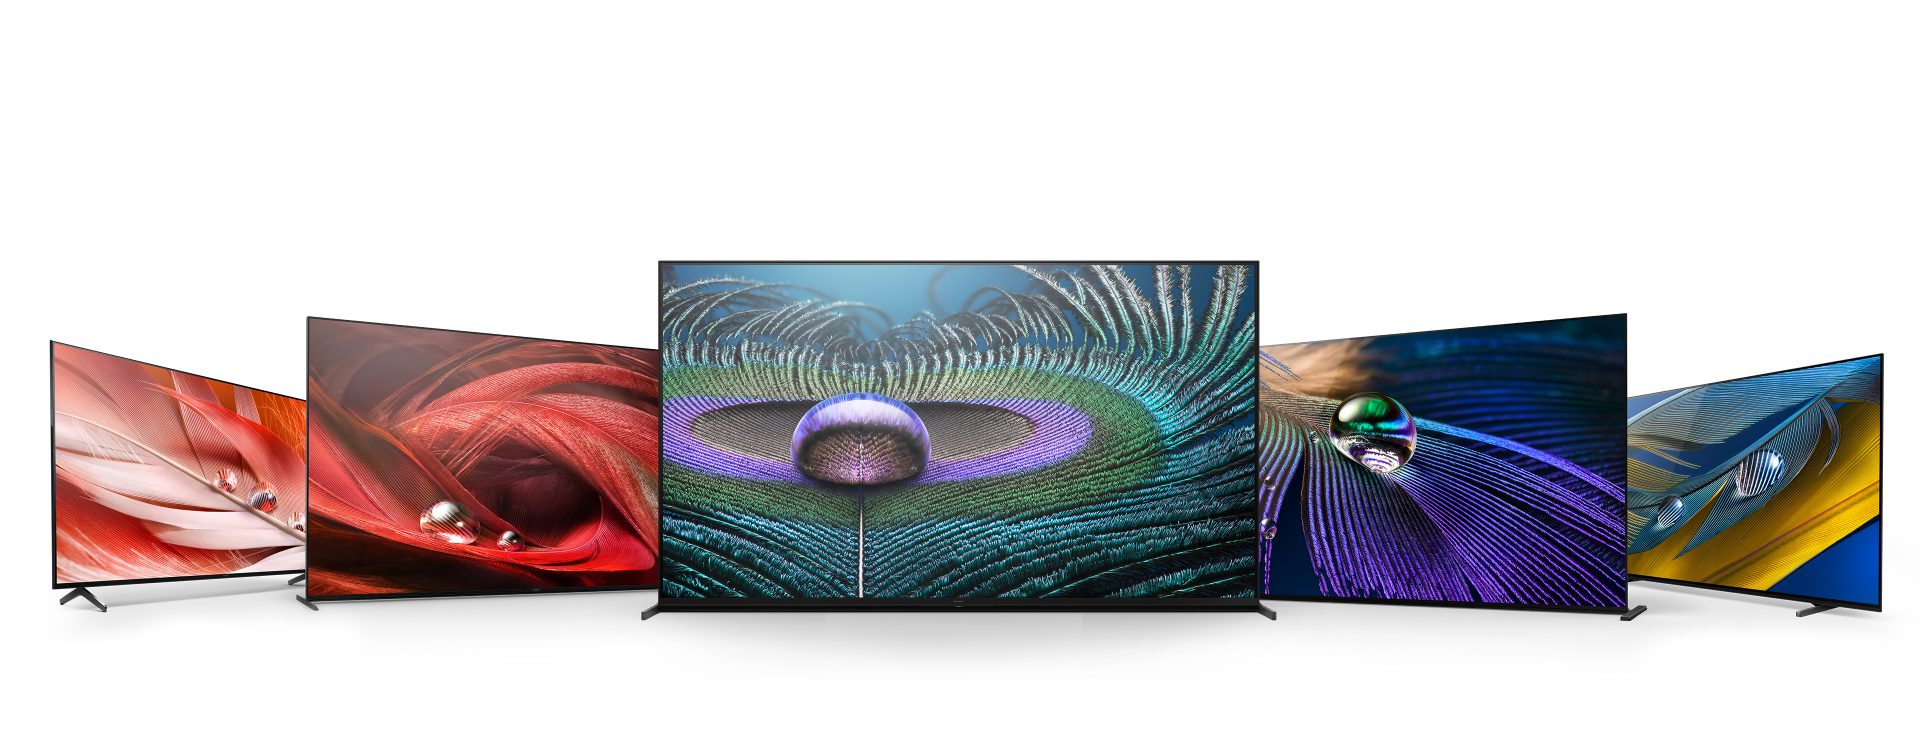 Sony televisions